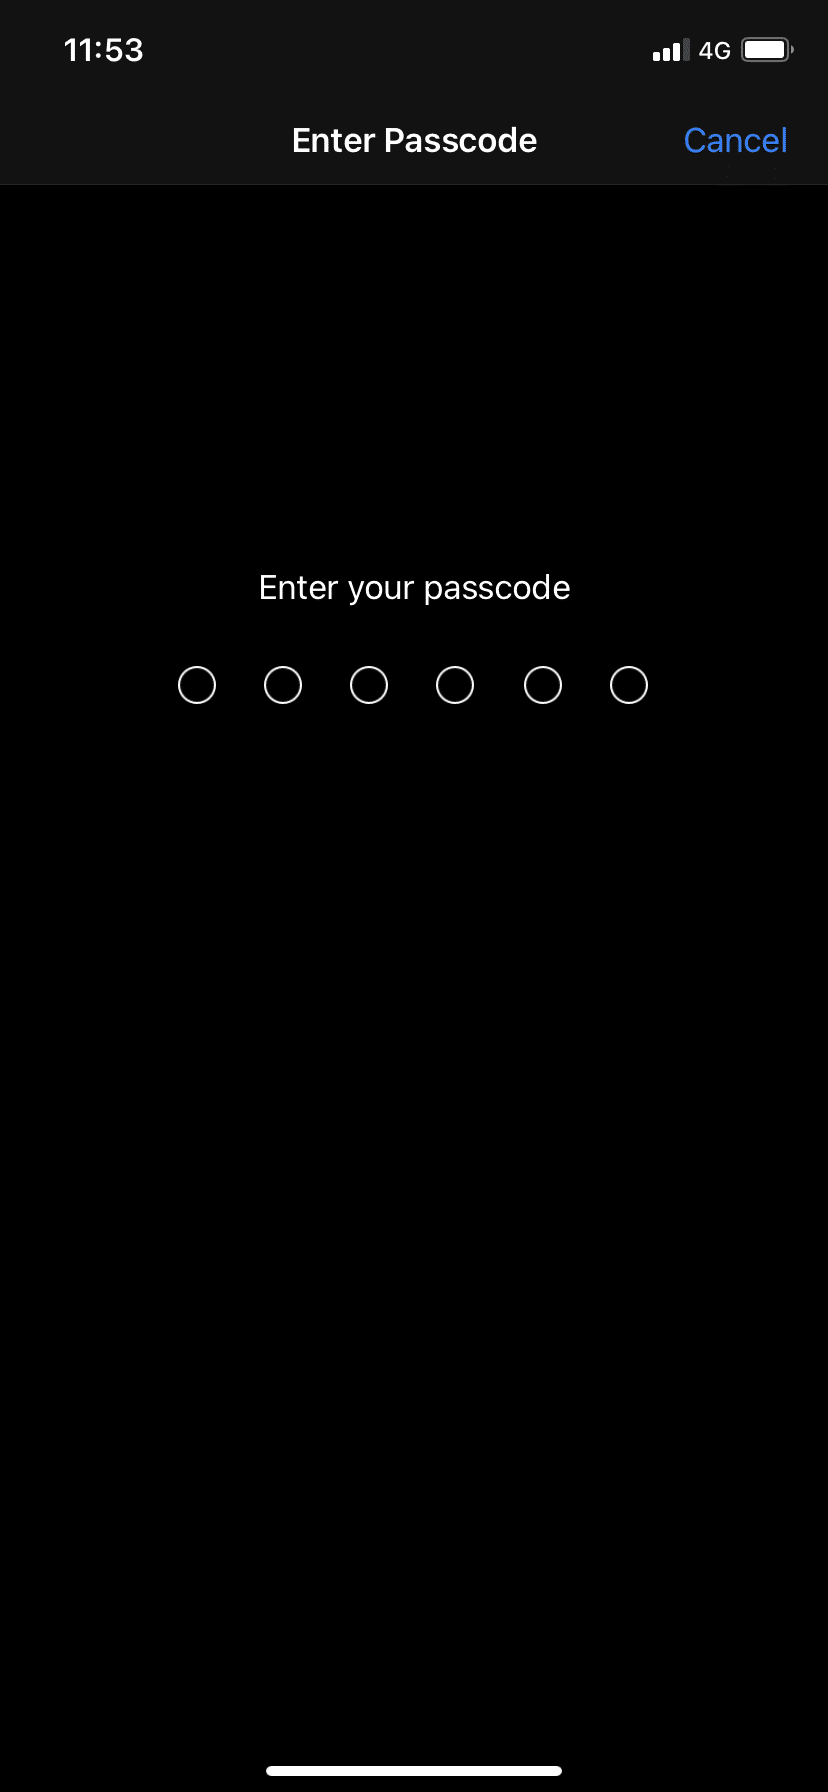 Enter your Passcode. itunes could not connect to the iphone